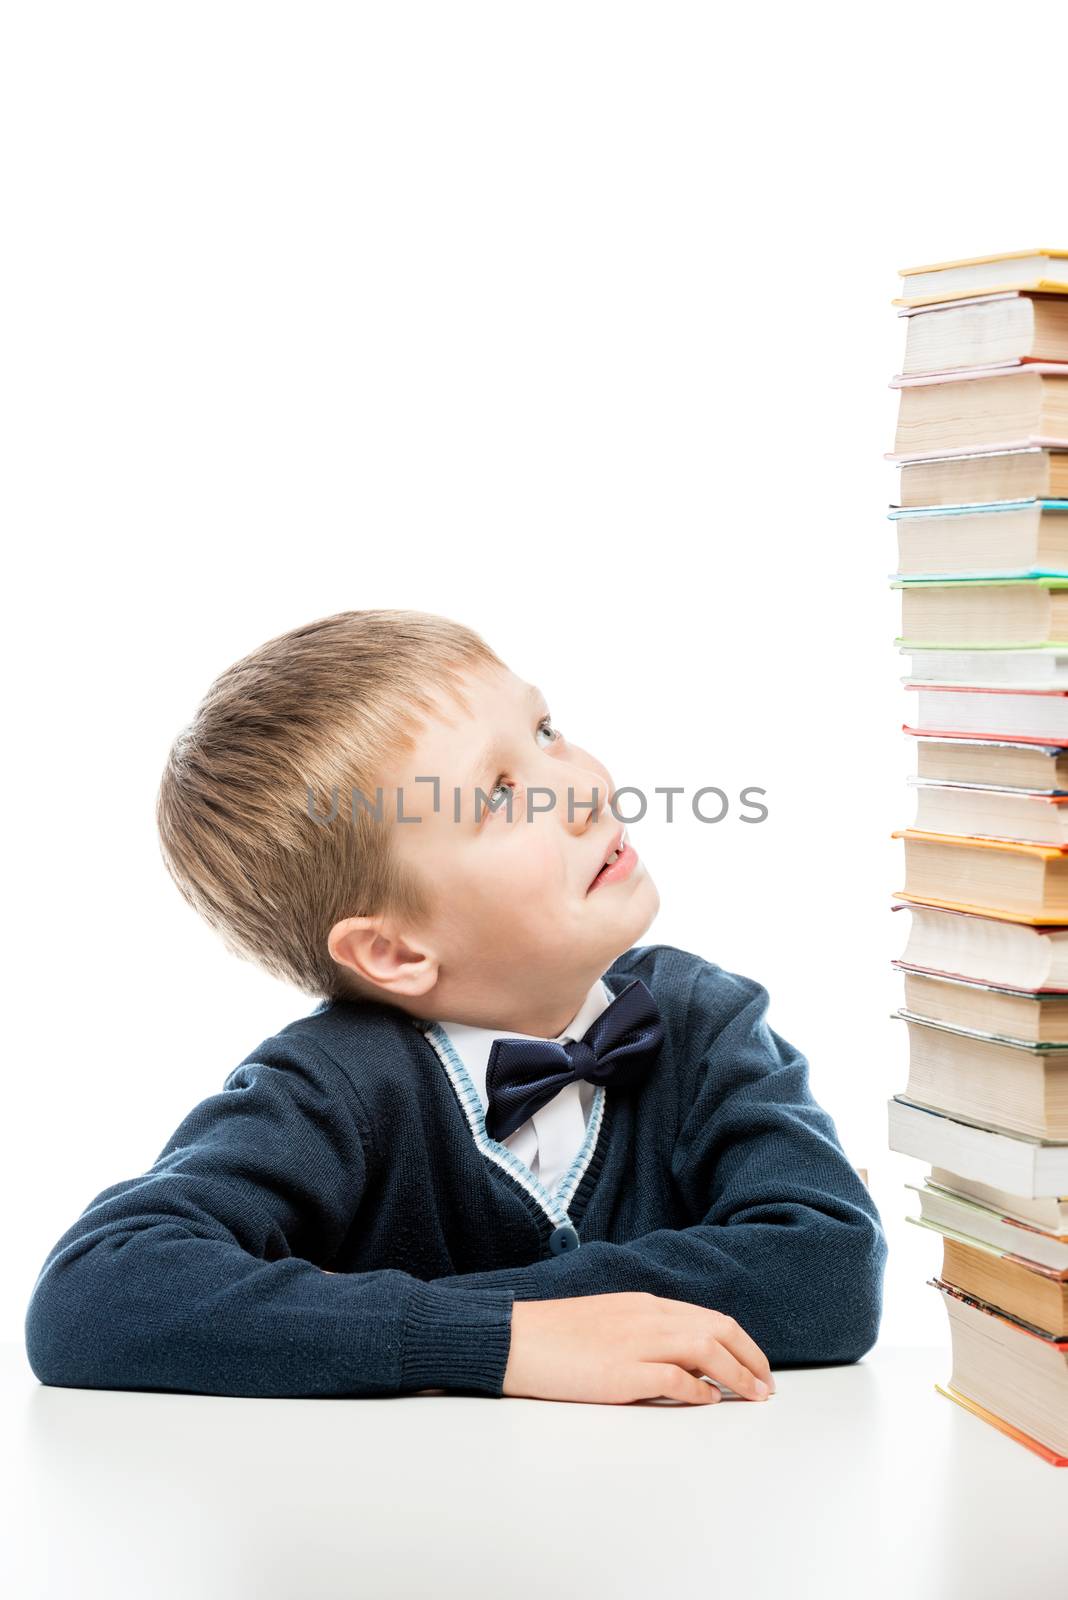 the schoolboy looks at the heap of books on the table by kosmsos111